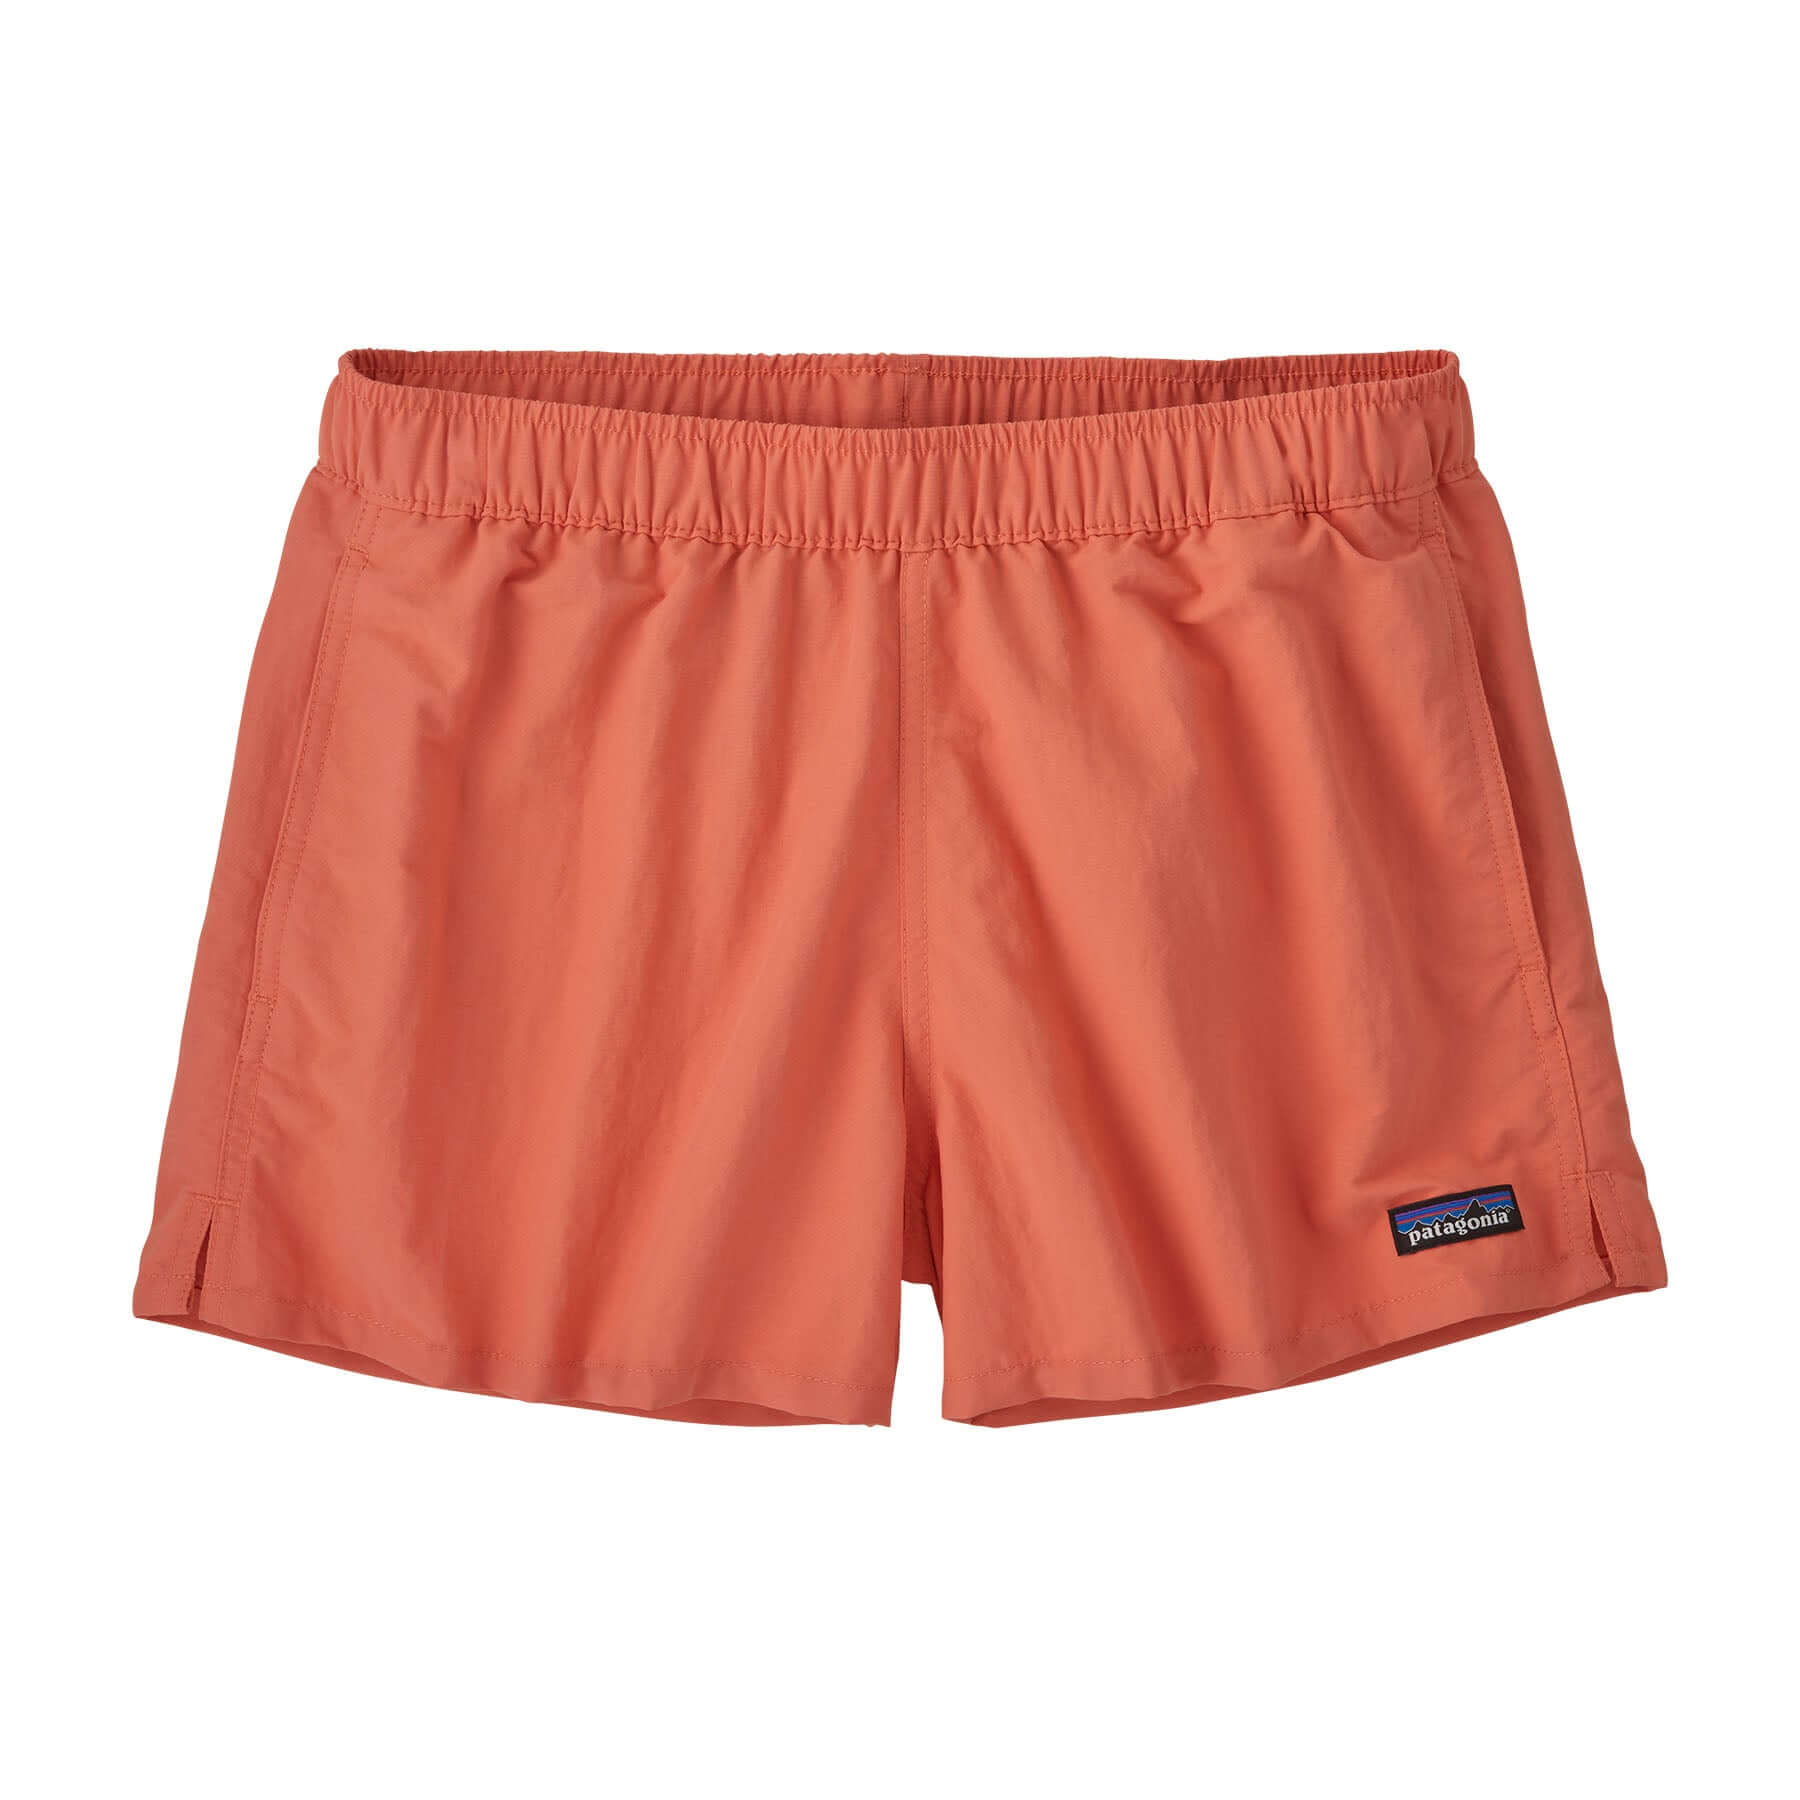 Women's Barely Baggies Shorts - 2 1/2 in. in Coho Coral | Patagonia Bend